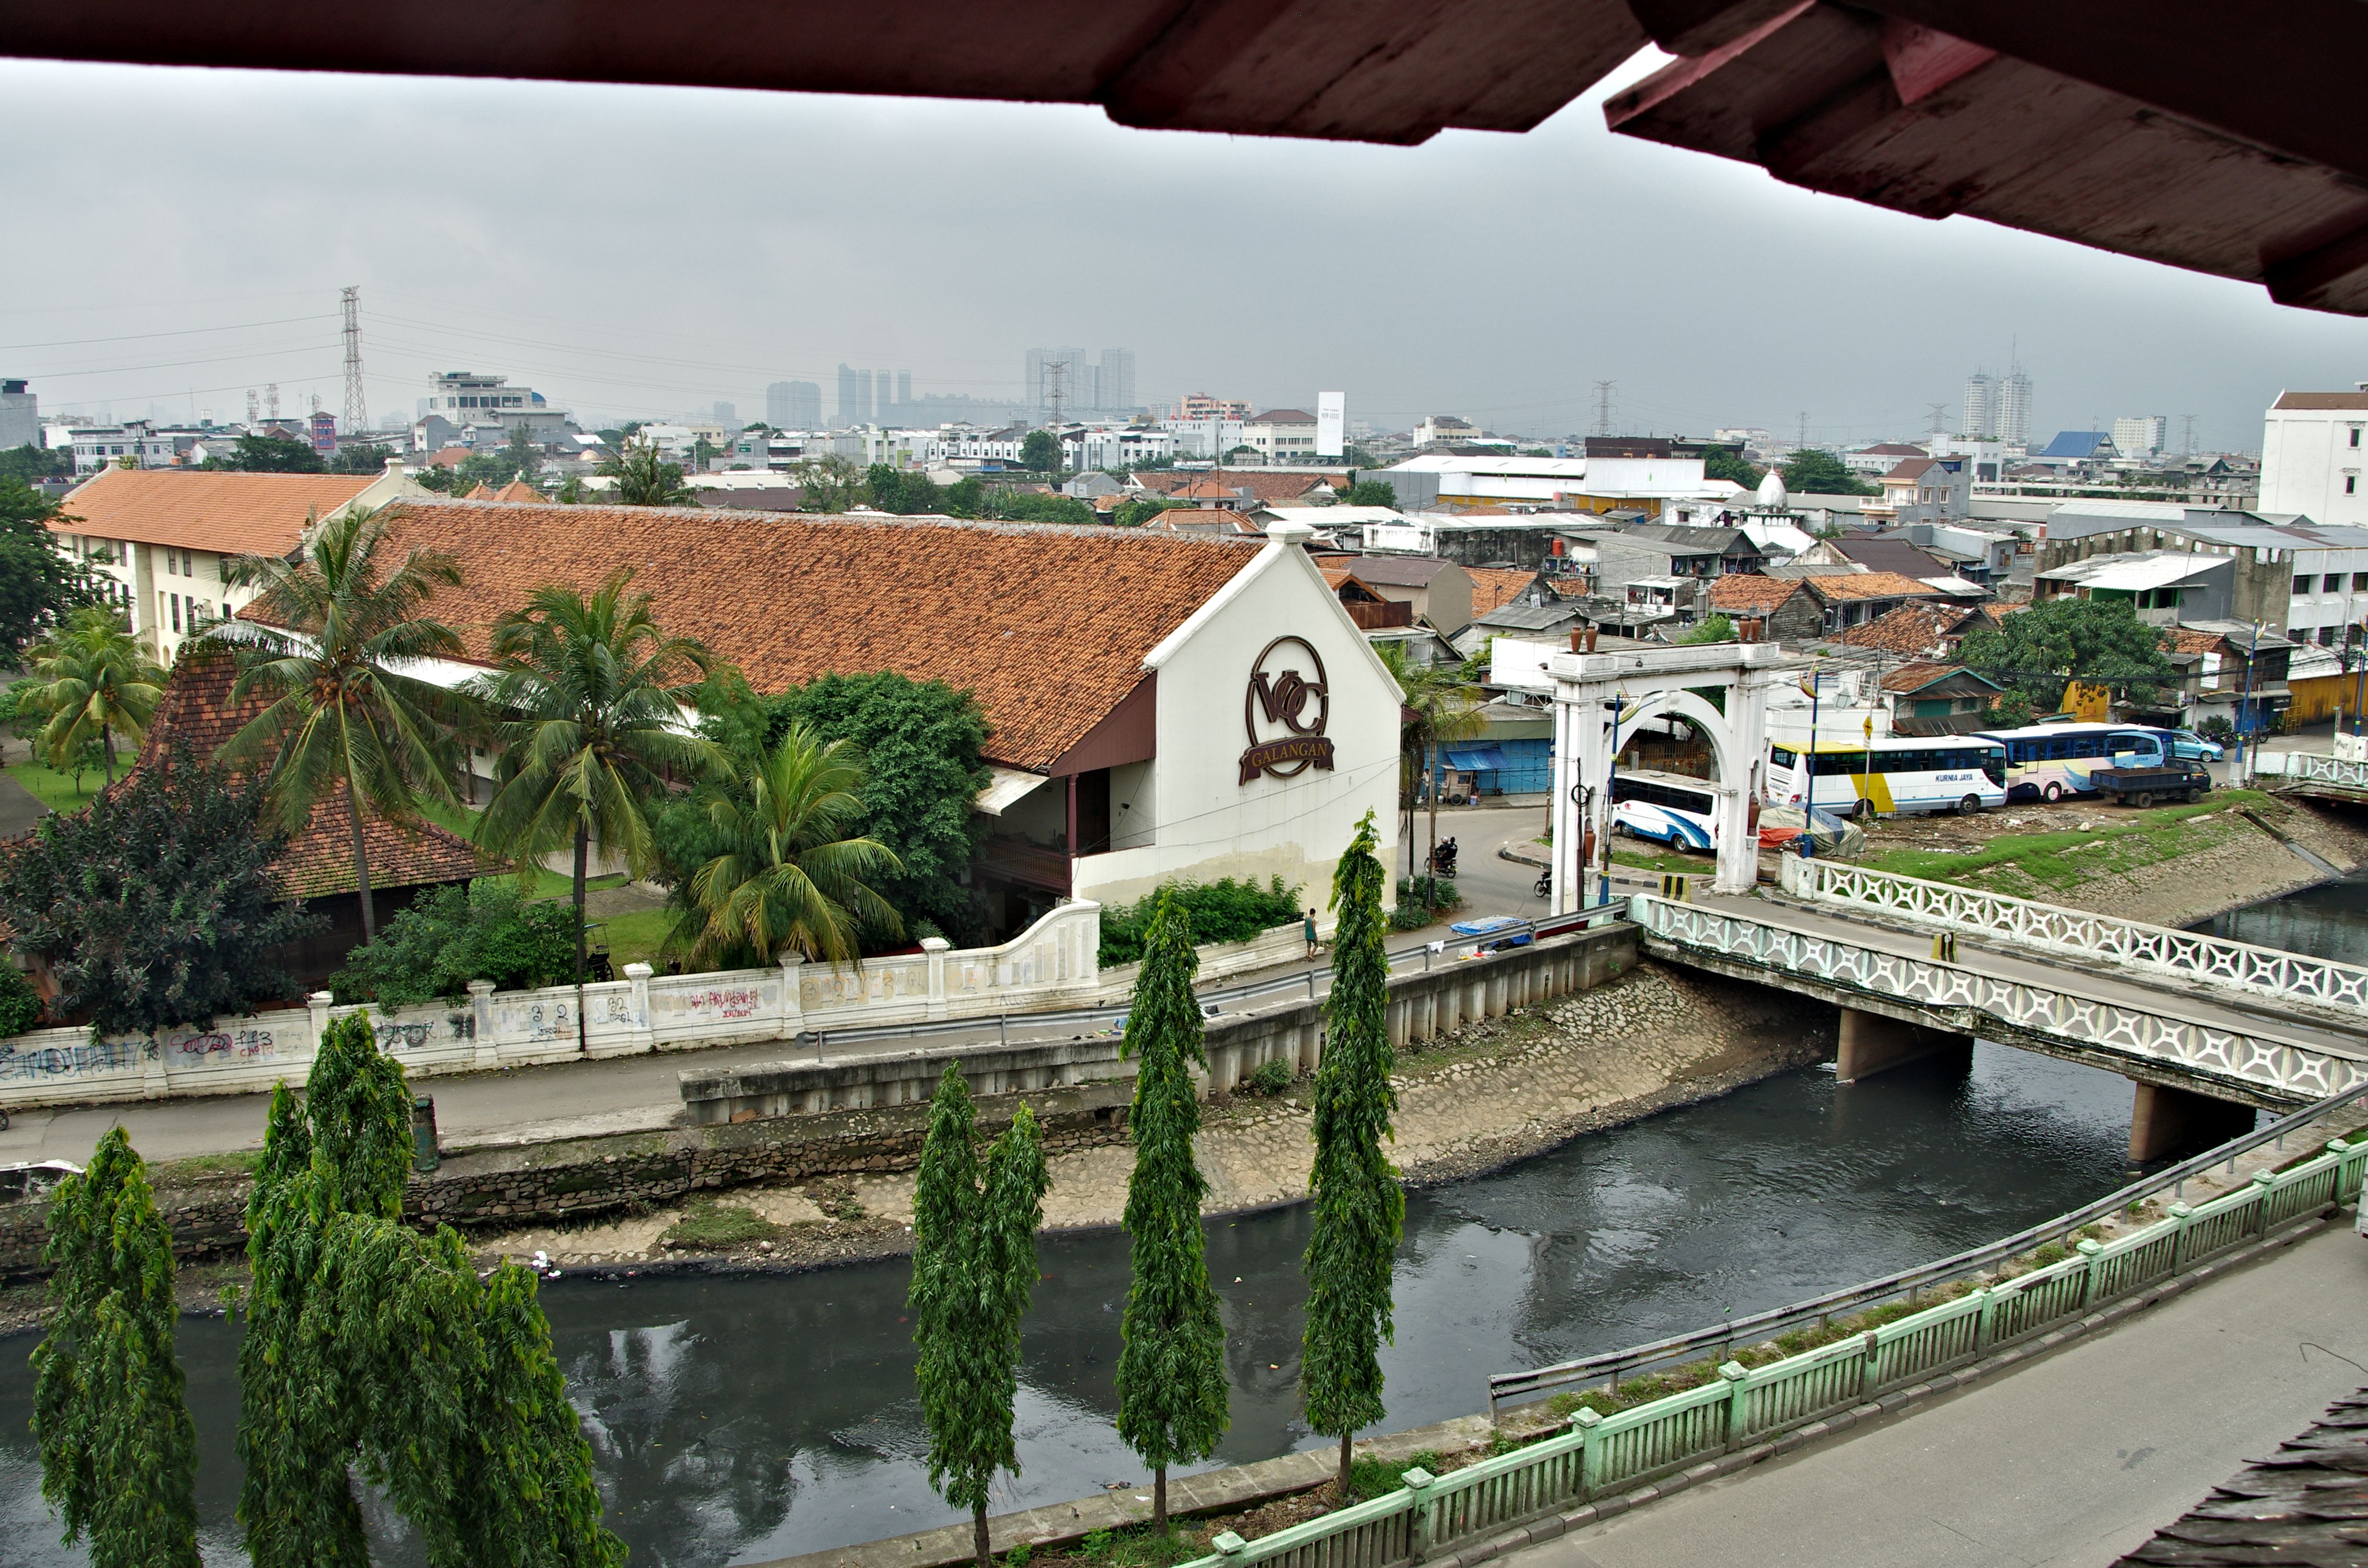 A view towards north from the 2nd (top) floor of the old Watchtower at Sunda Kelapa Port, Jakarta (2015-02-15.). The building seen in the middle used to be the Batavia office of VOC, now a restaurant. オールド・バタフィア地区，旧スンダ・クラパ港管制塔３階から南方（内陸側）を望む,。中央の建物は嘗ての VOC (オランダ東印度会社）のバタフィア・オフィス，今はレストラン。